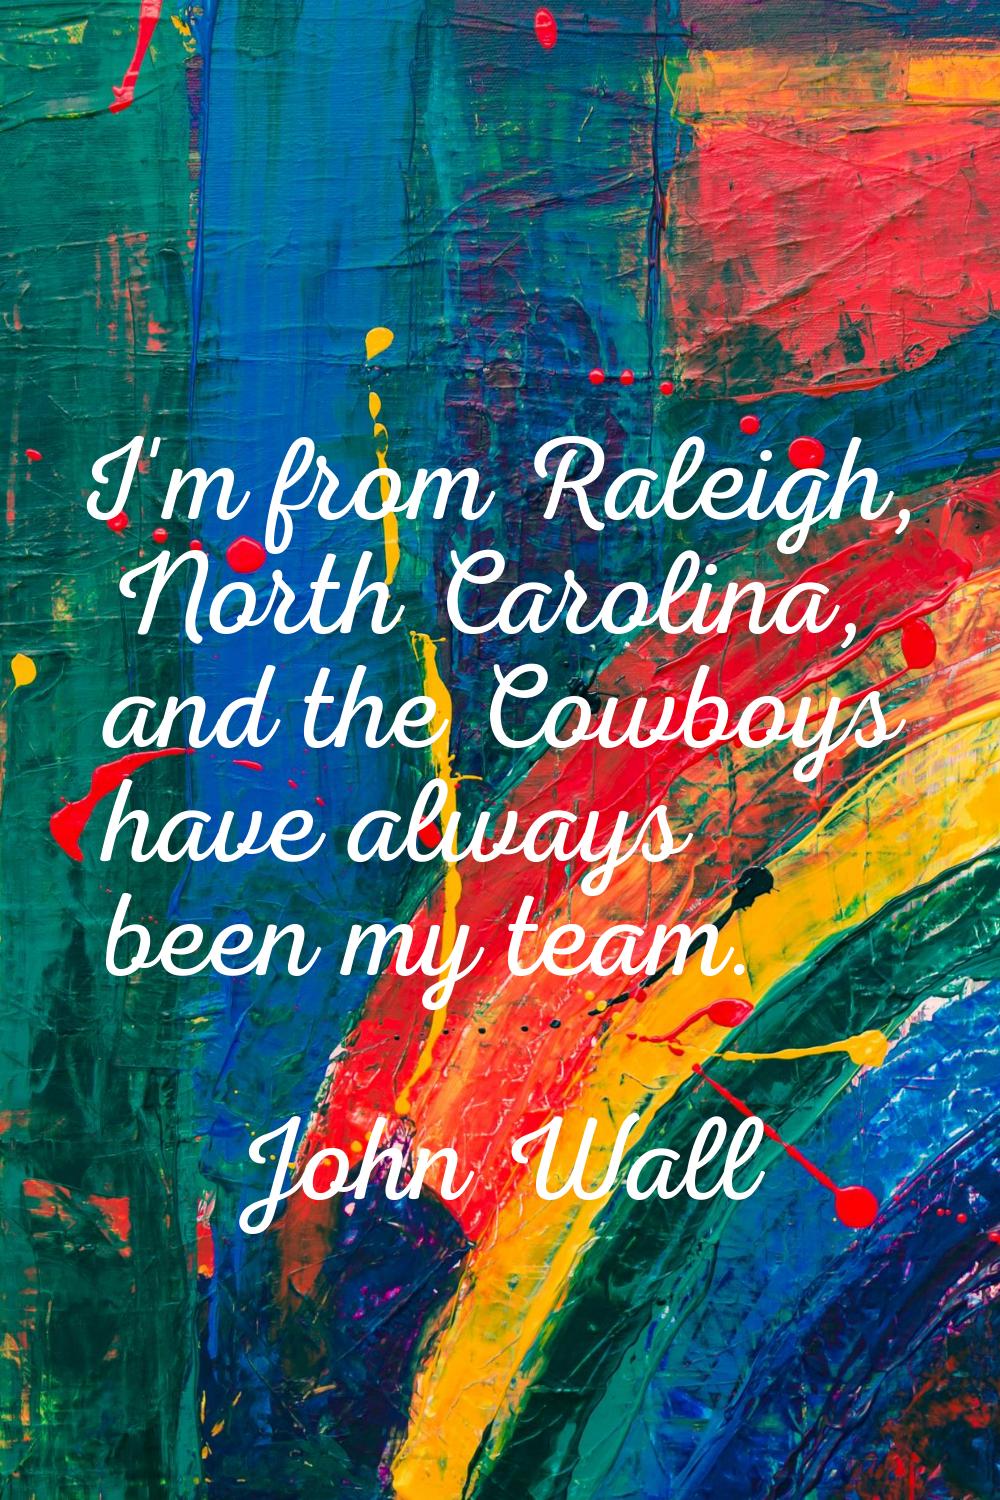 I'm from Raleigh, North Carolina, and the Cowboys have always been my team.